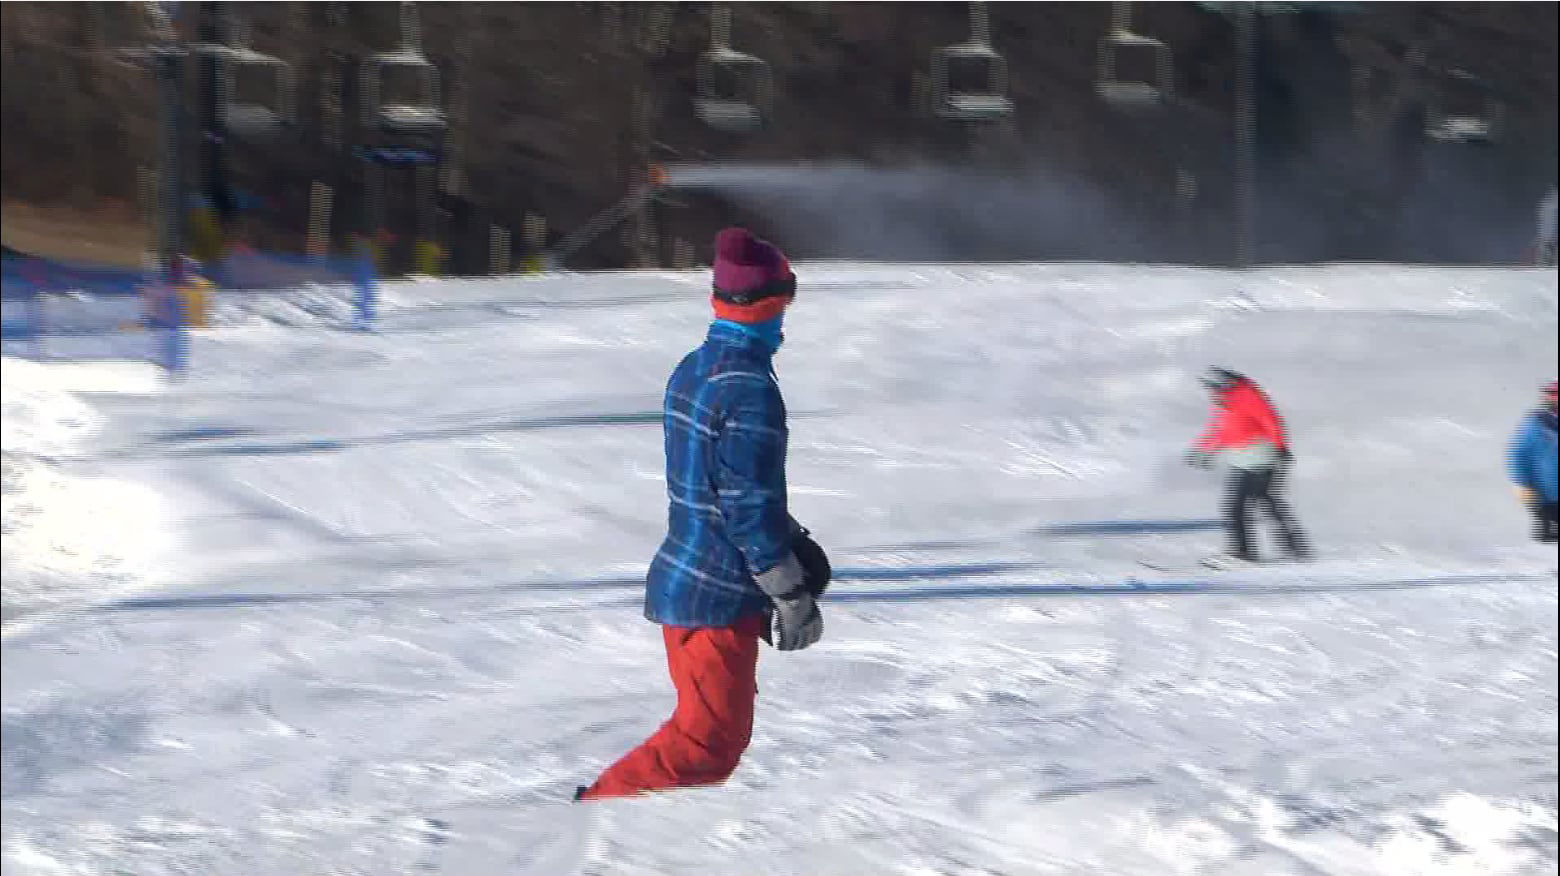 Opening day for local ski resort Paoli Peaks